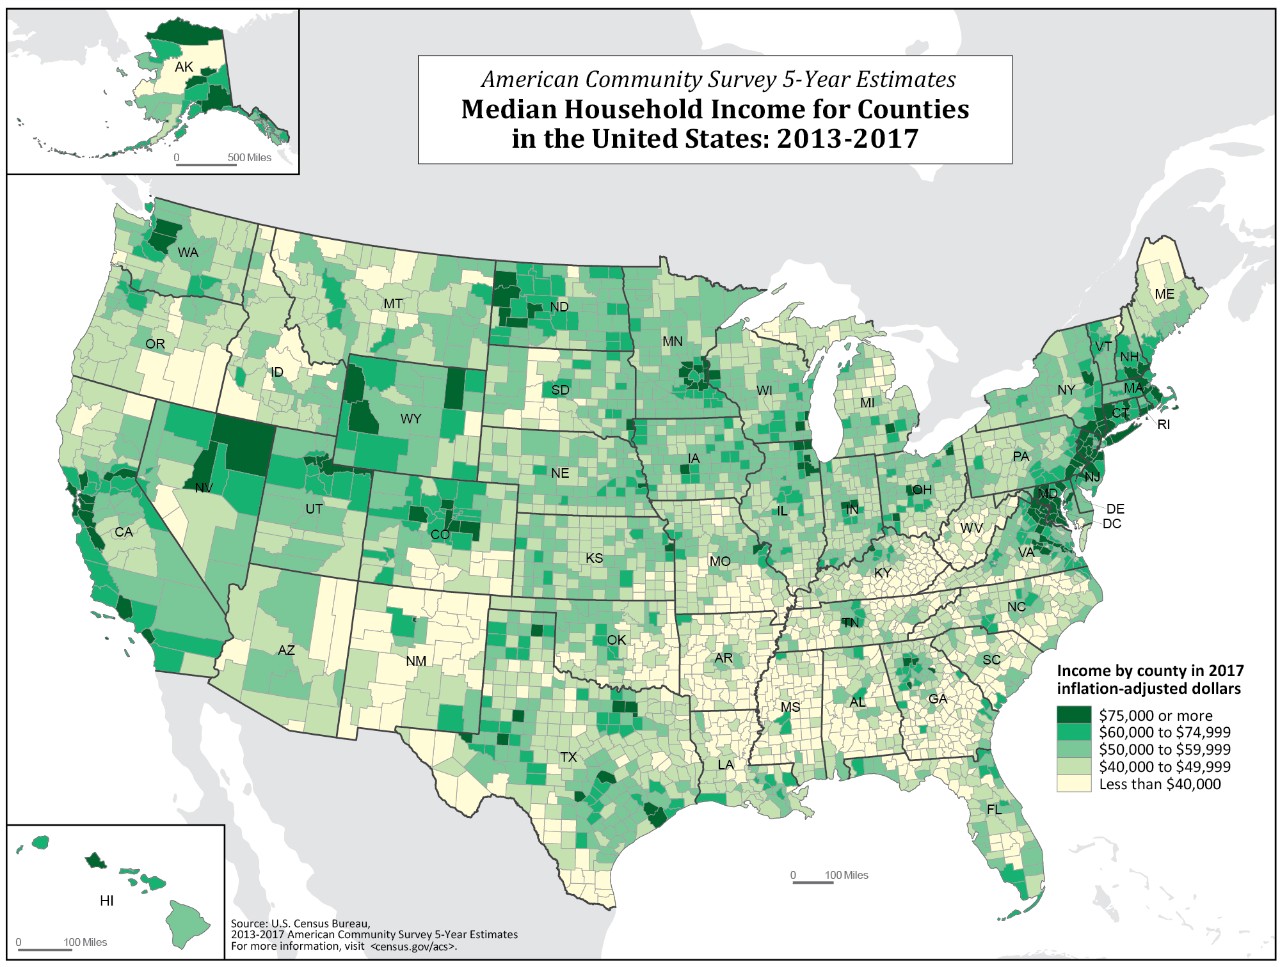 Median Household Income for Counties in the United States: 2013-2017